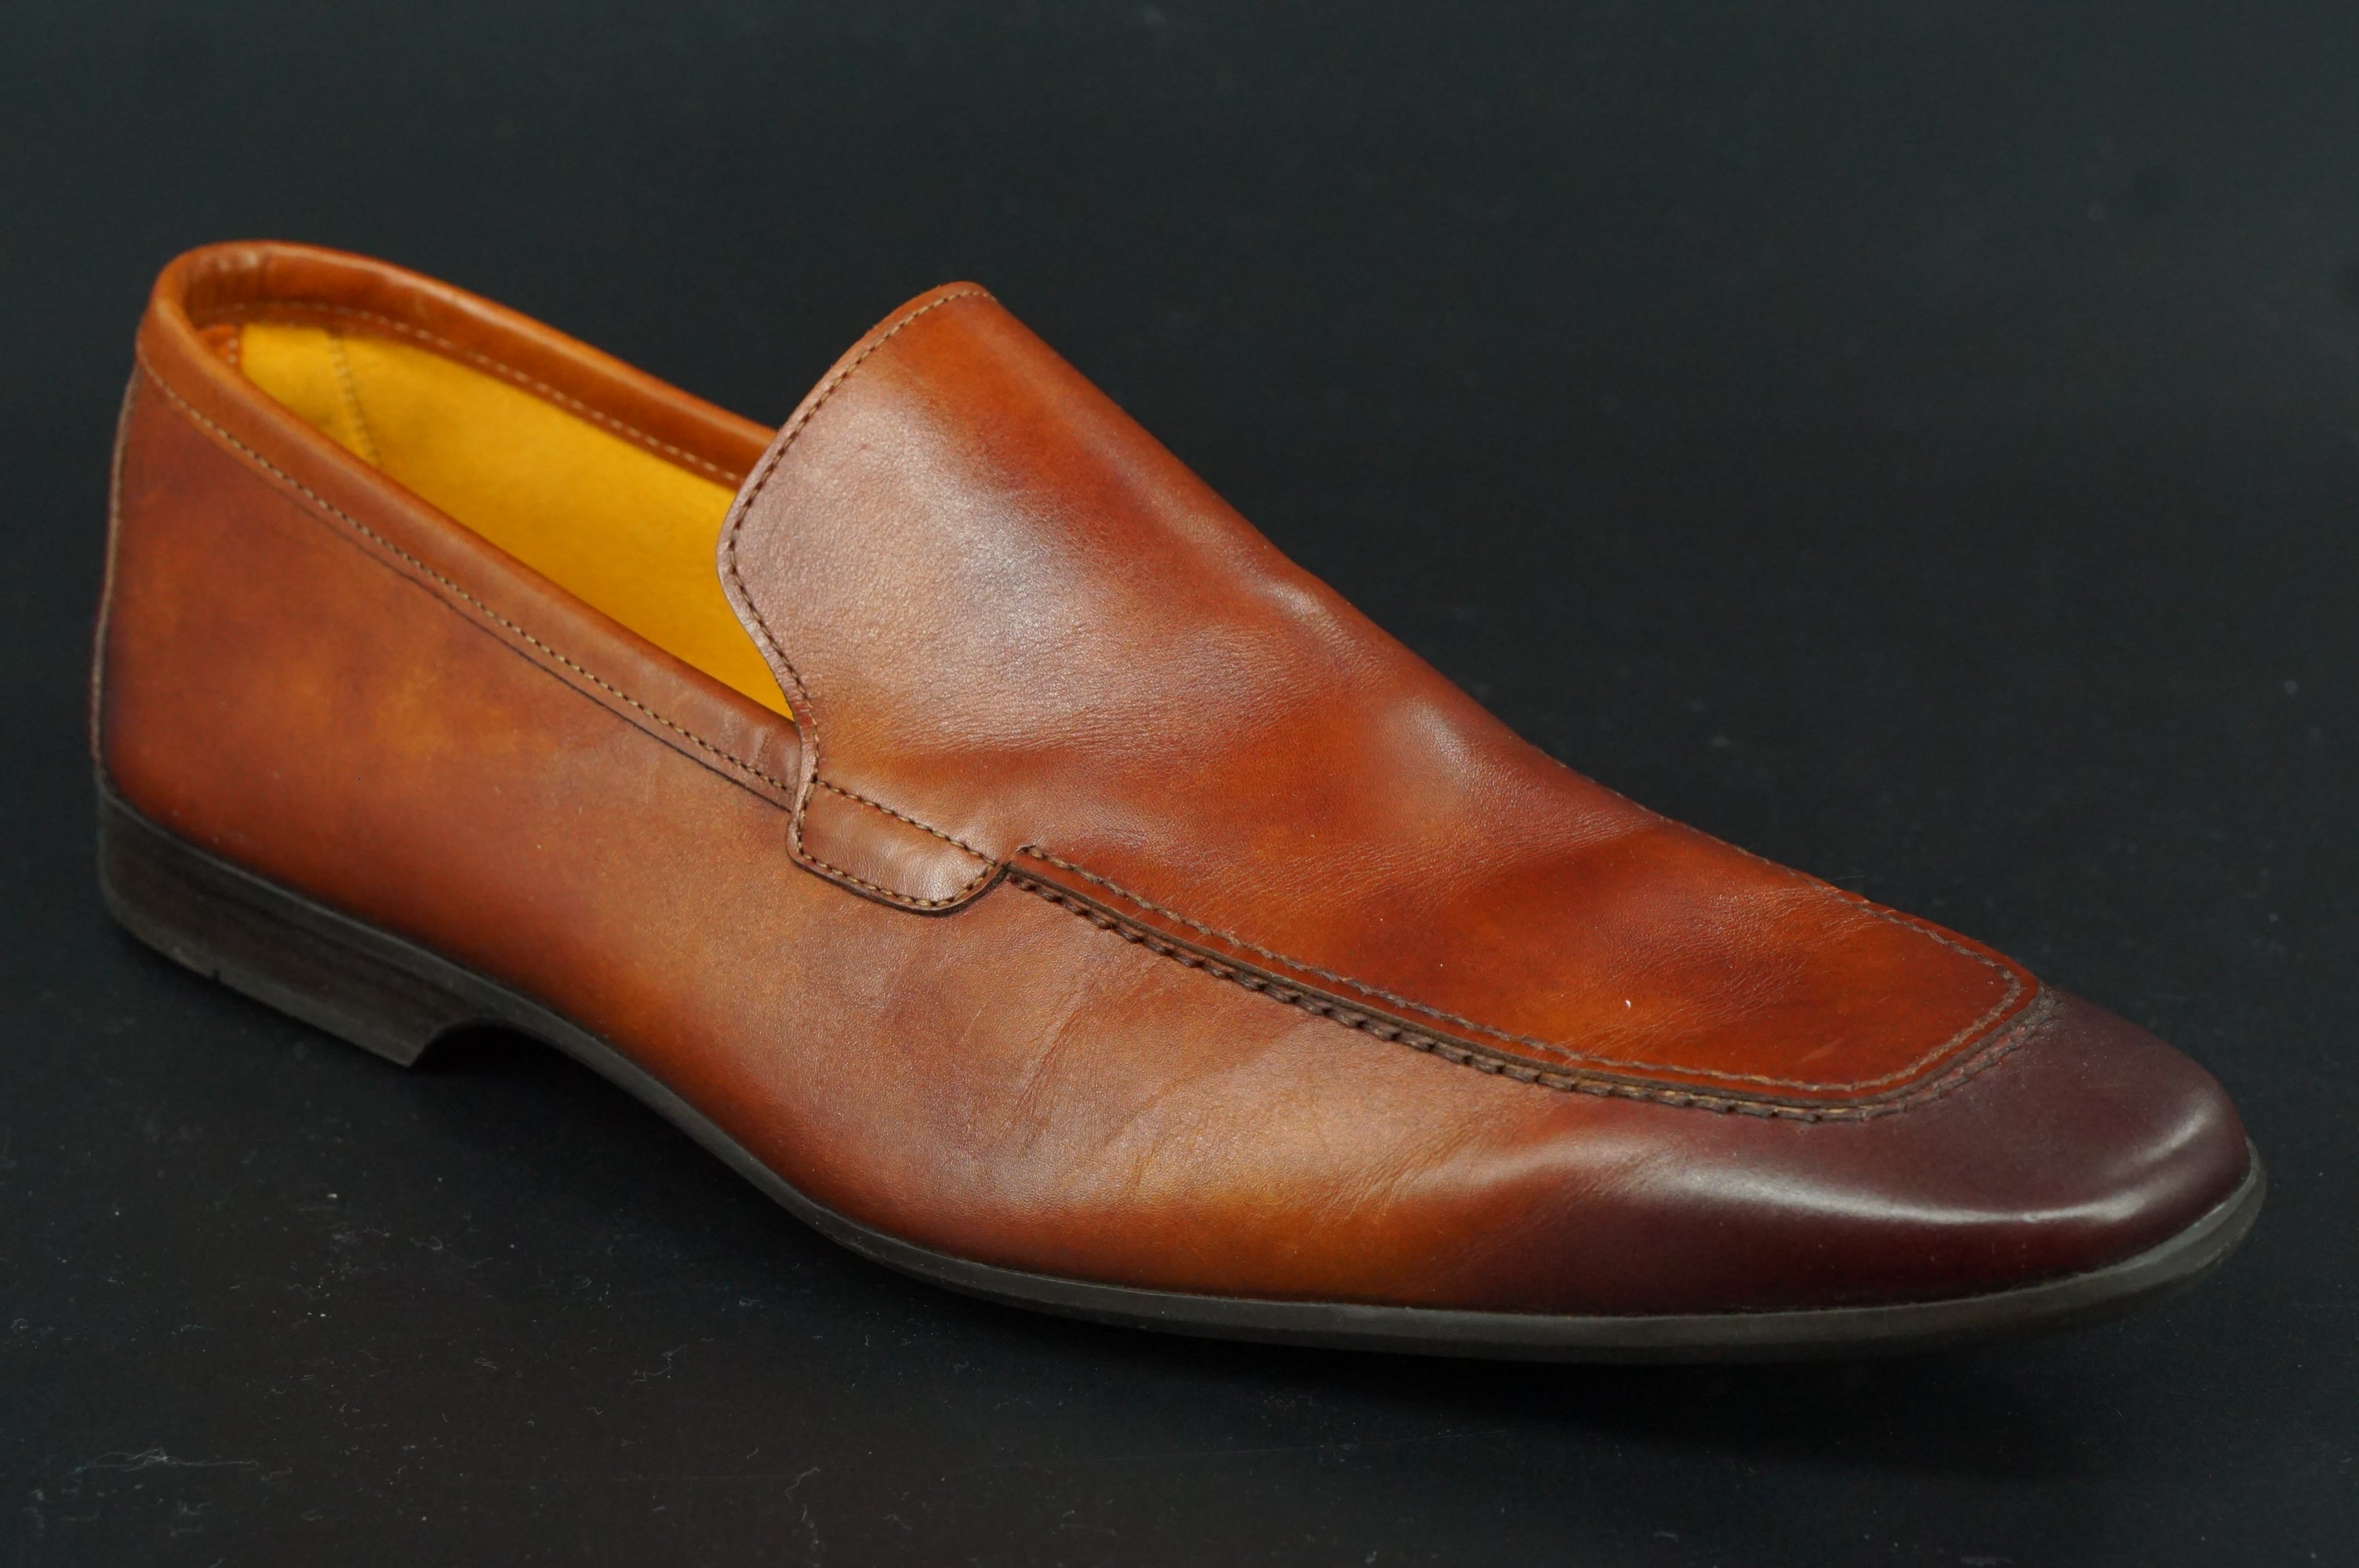 Magnanni Sato Smooth Loafers SZ 12 Cognac brown Leather Apron toe $350